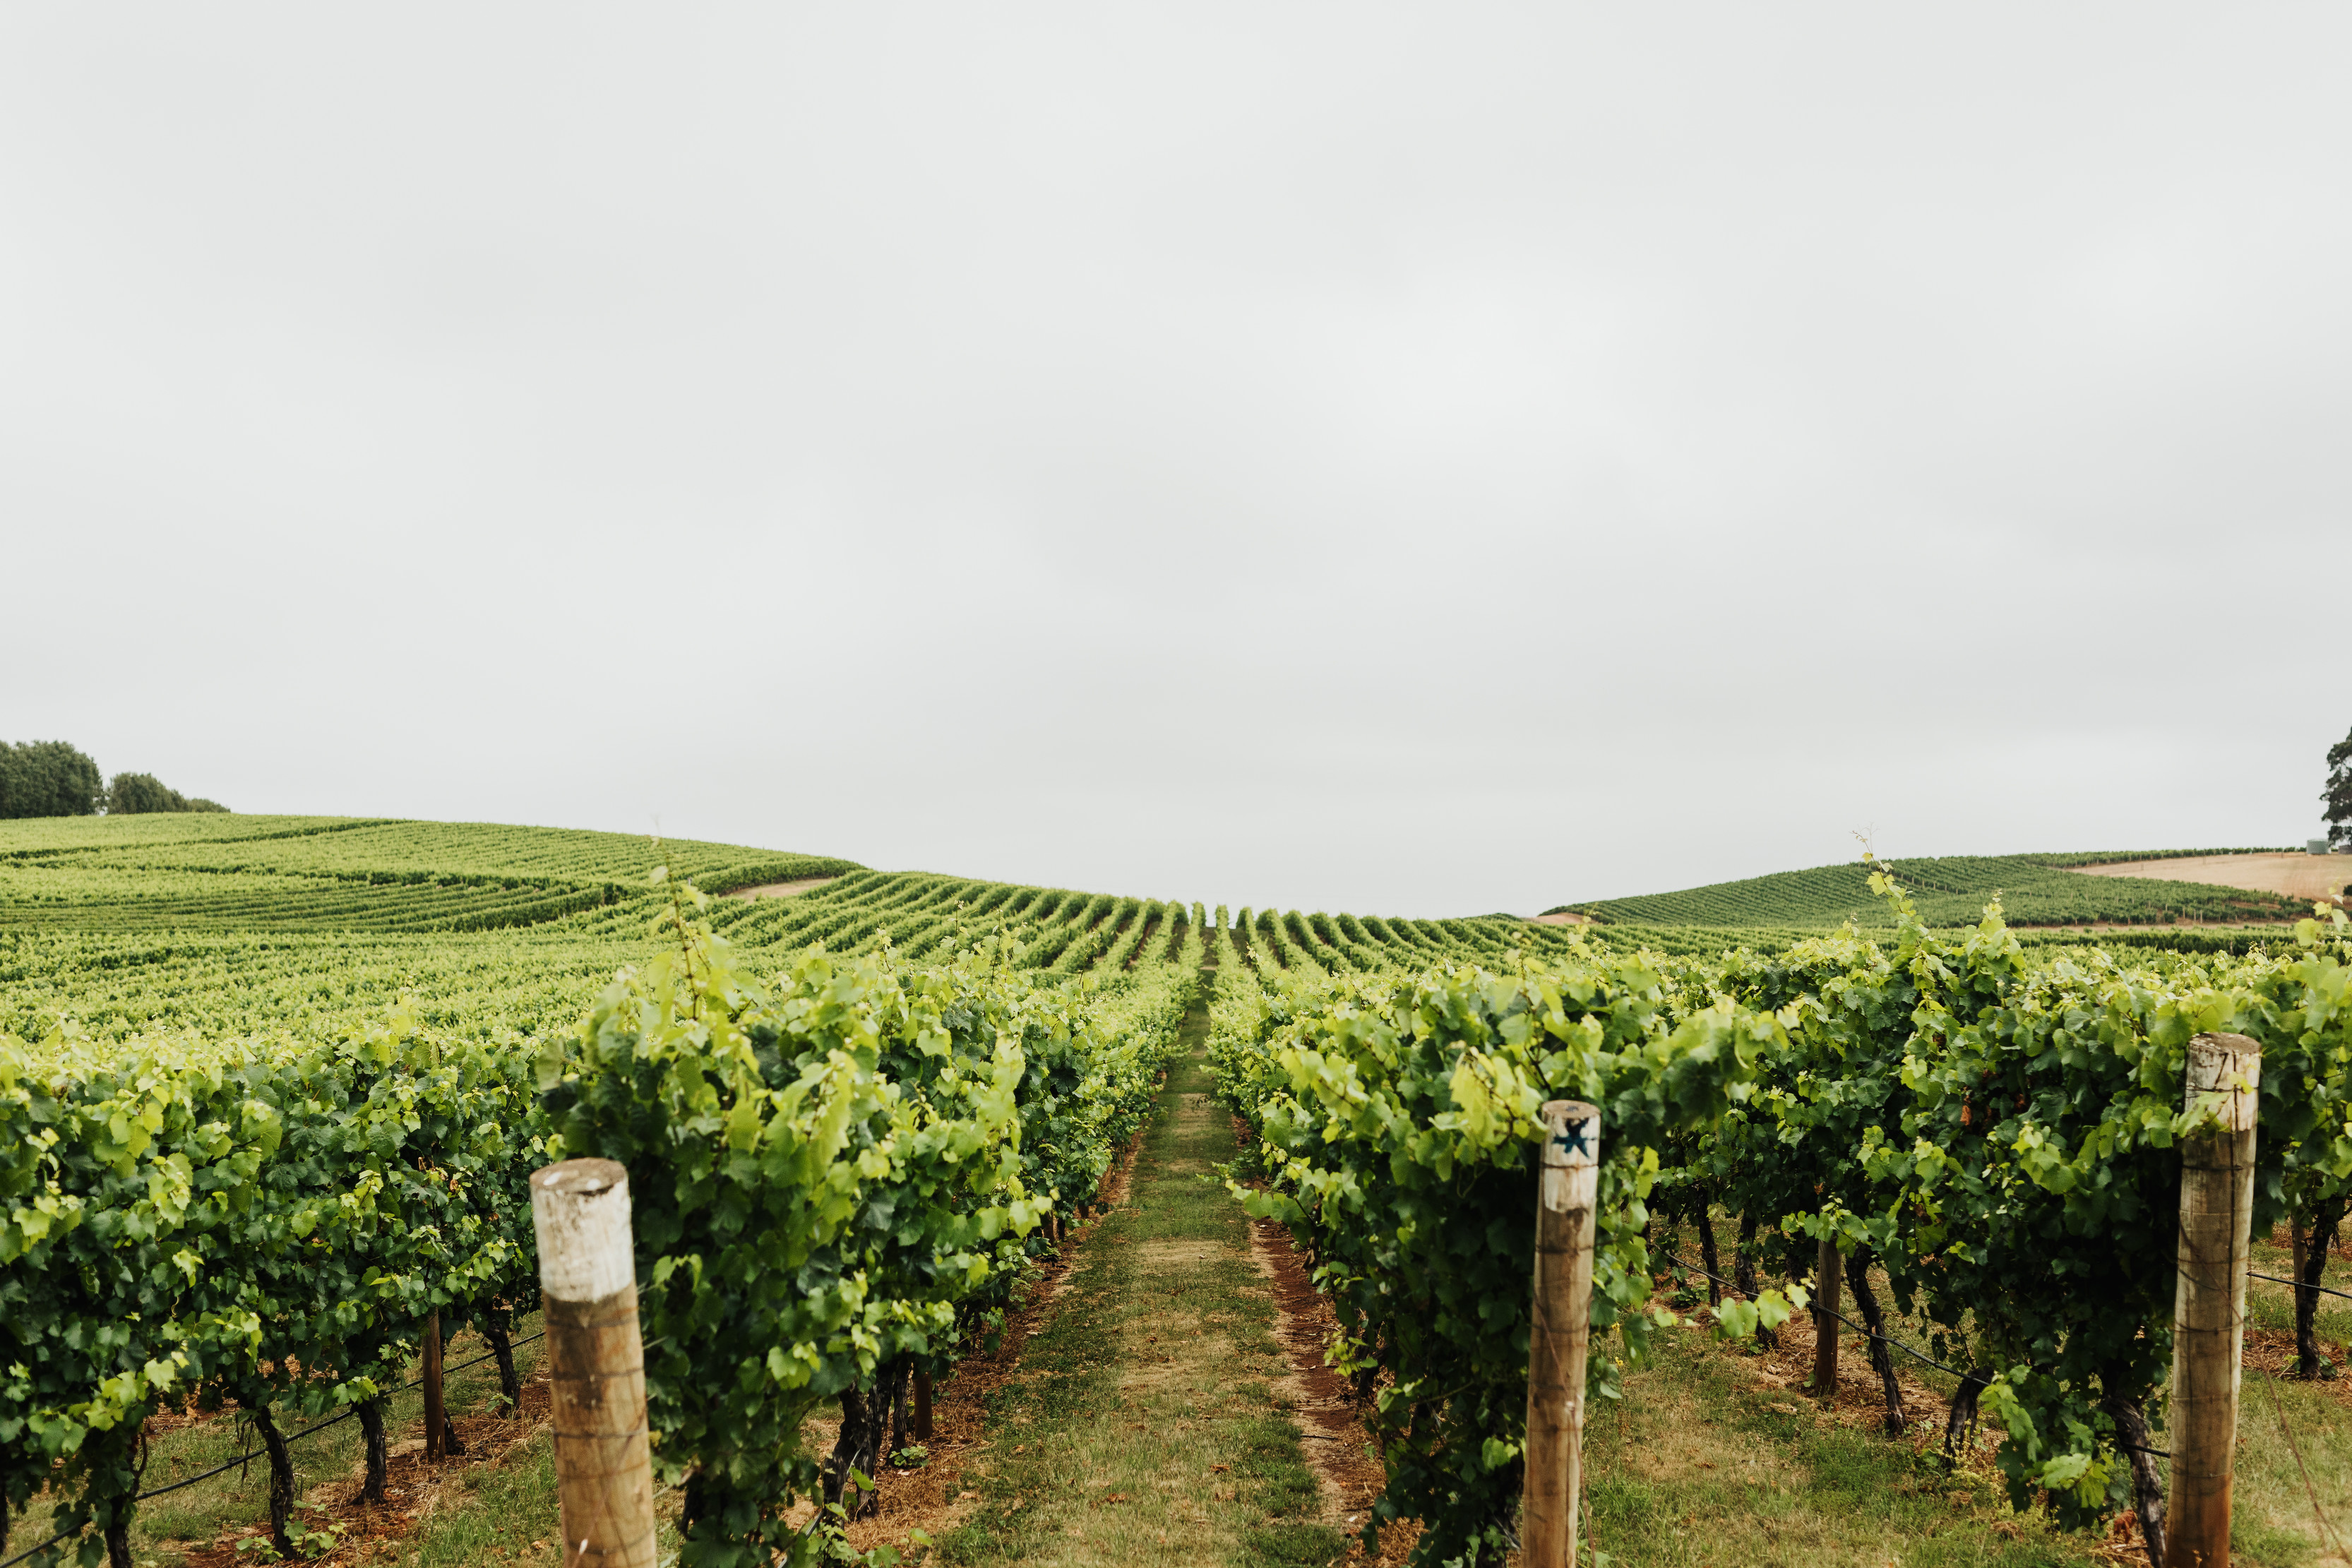 Stunning images of the vineyards running for as long as the eye can see at Jansz Tasmania.